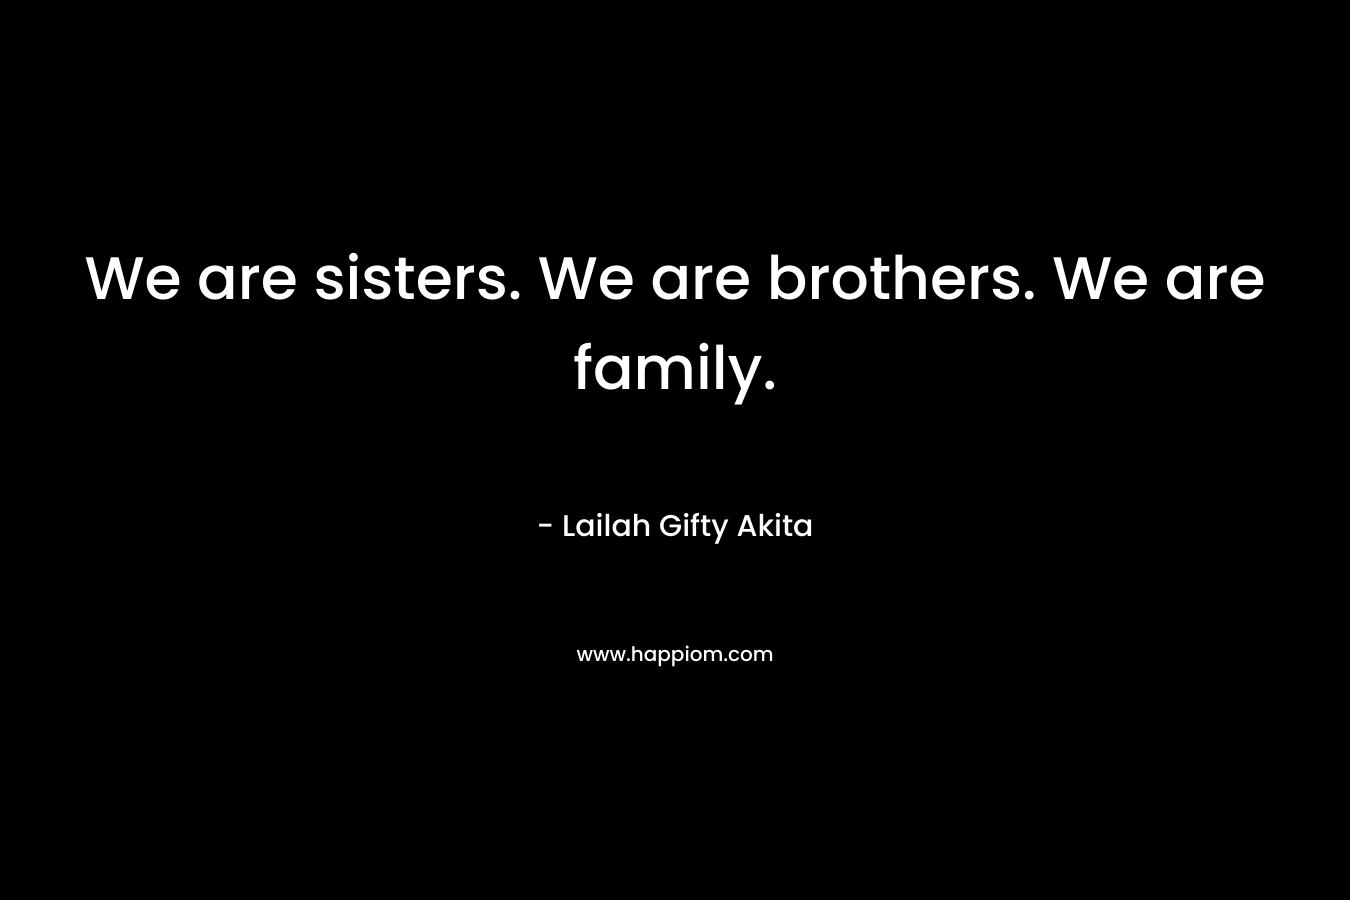 We are sisters. We are brothers. We are family.